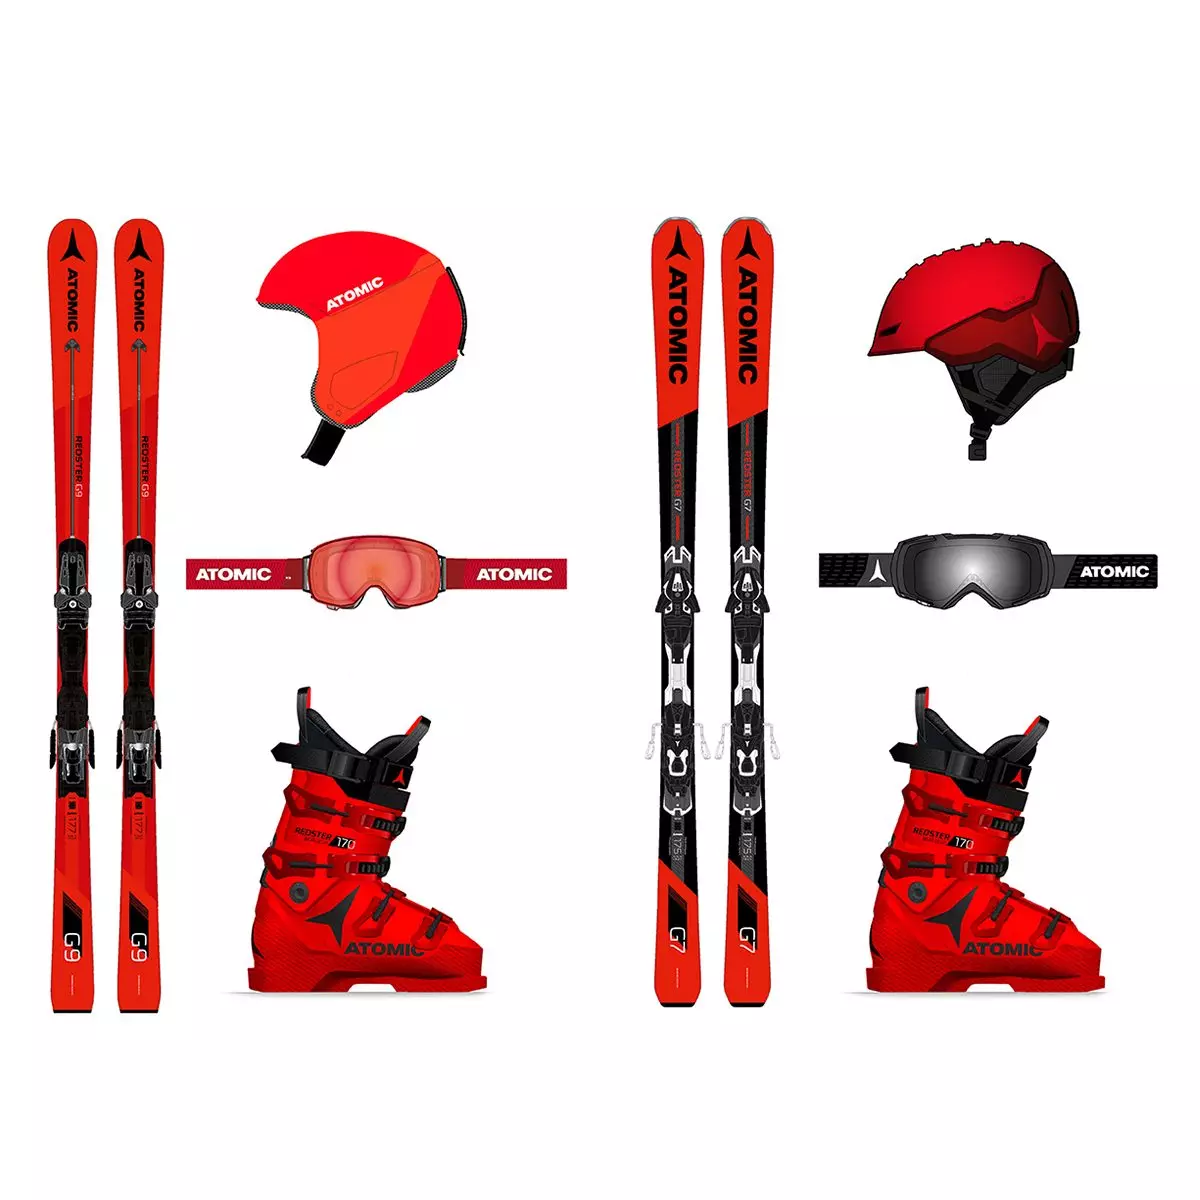 Atomic Redster series including skis, boots, goggles and helmets